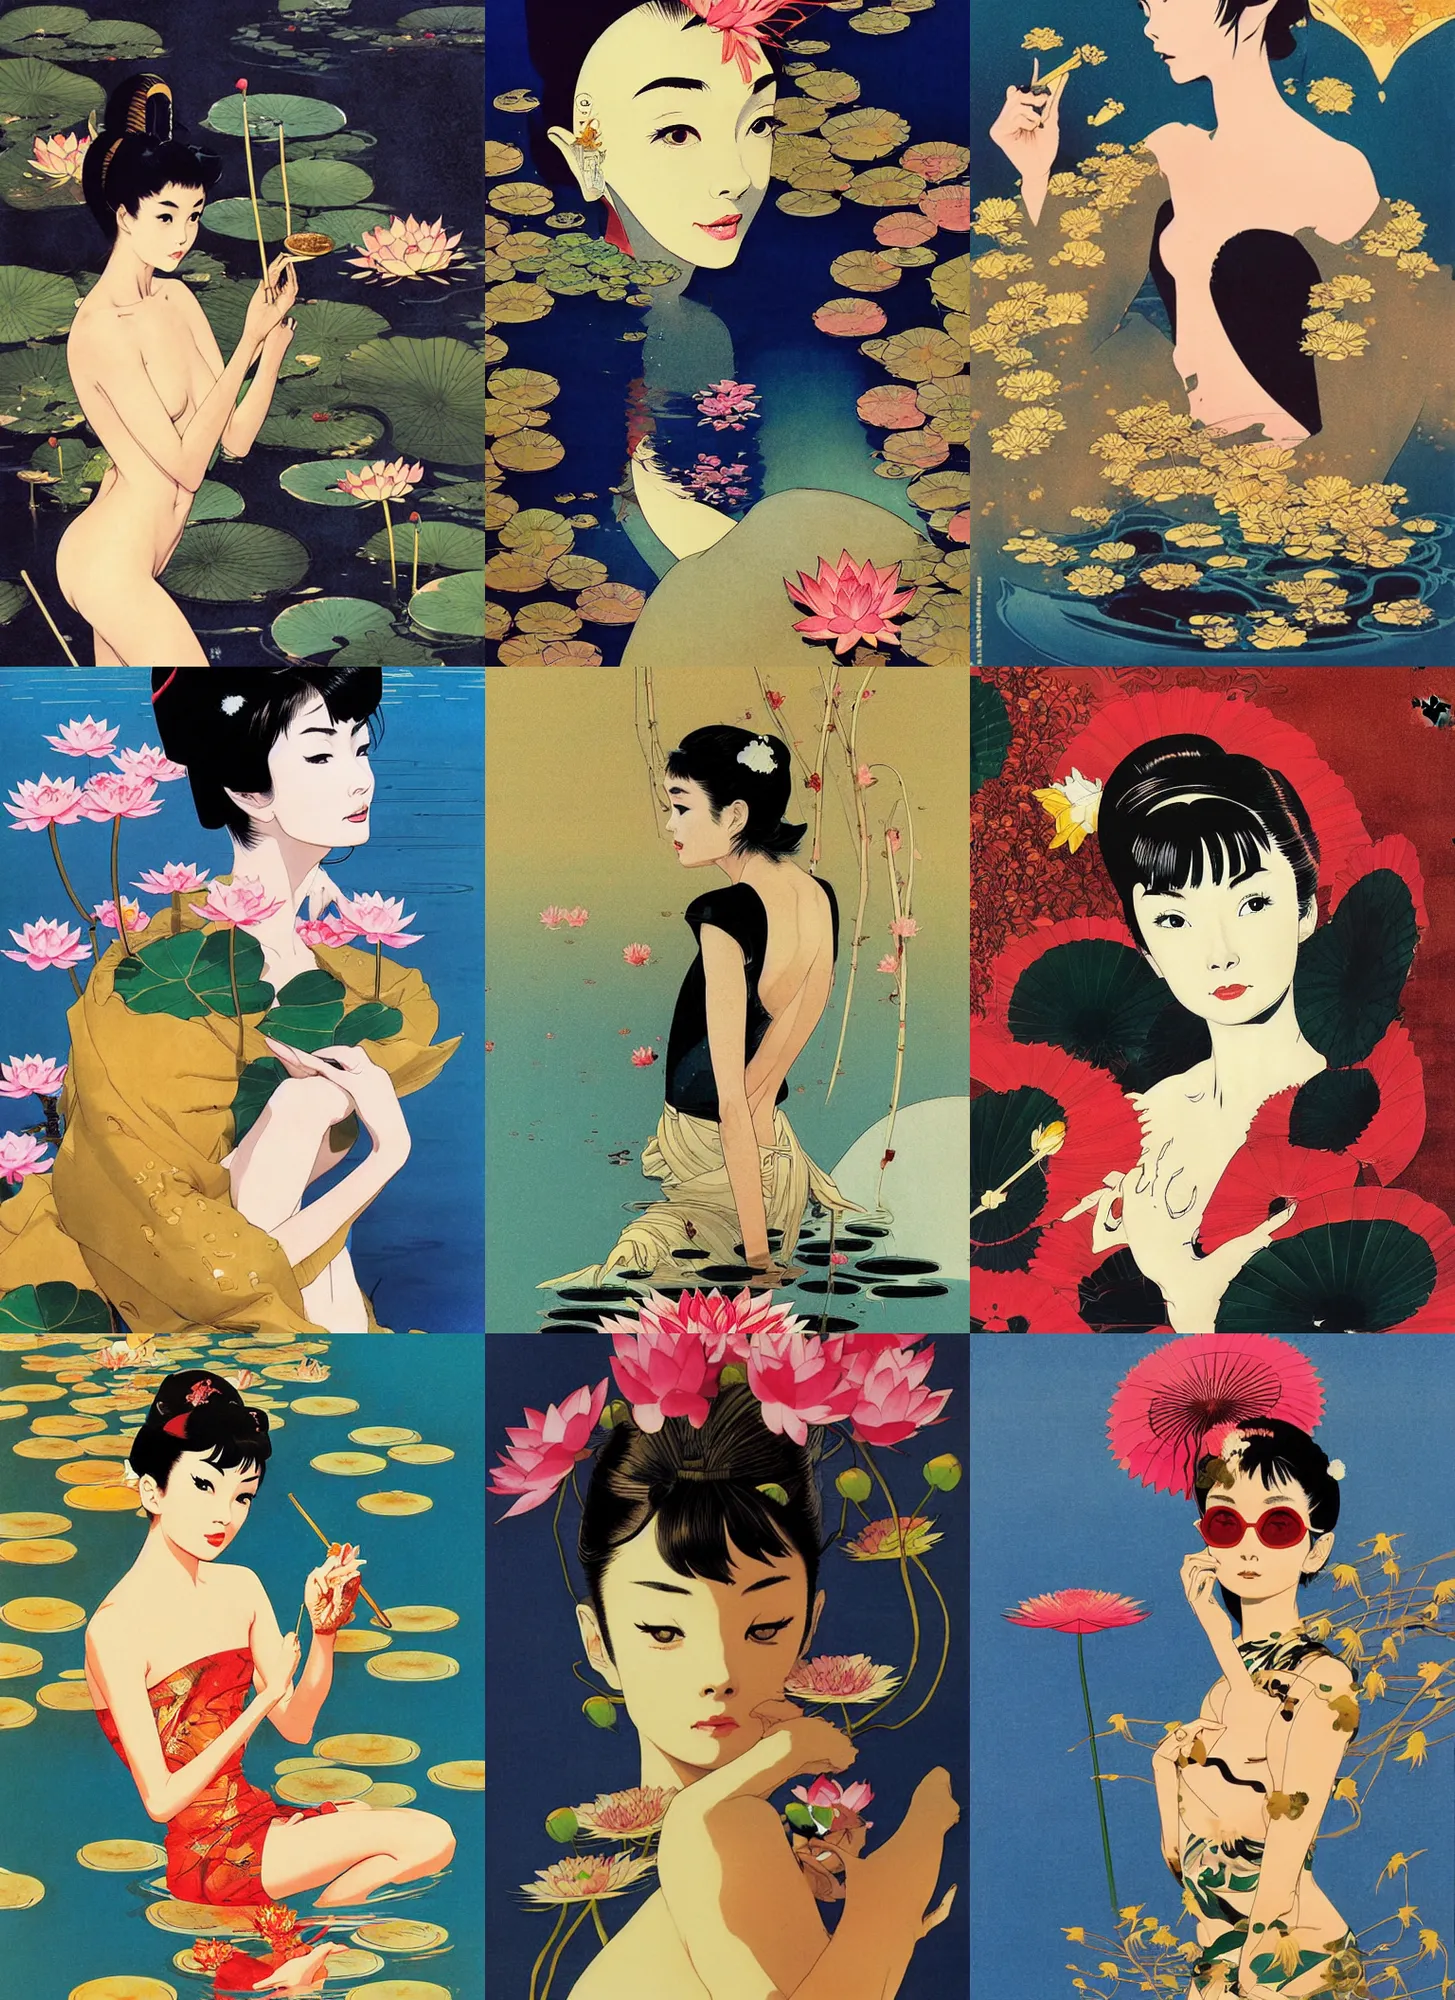 Prompt: japanese audrey hepburn emerging from gold pond with lotus flowers in ukiyoe theme by peter andrew jones and conrad roset, rule of thirds, seductive look, beautiful